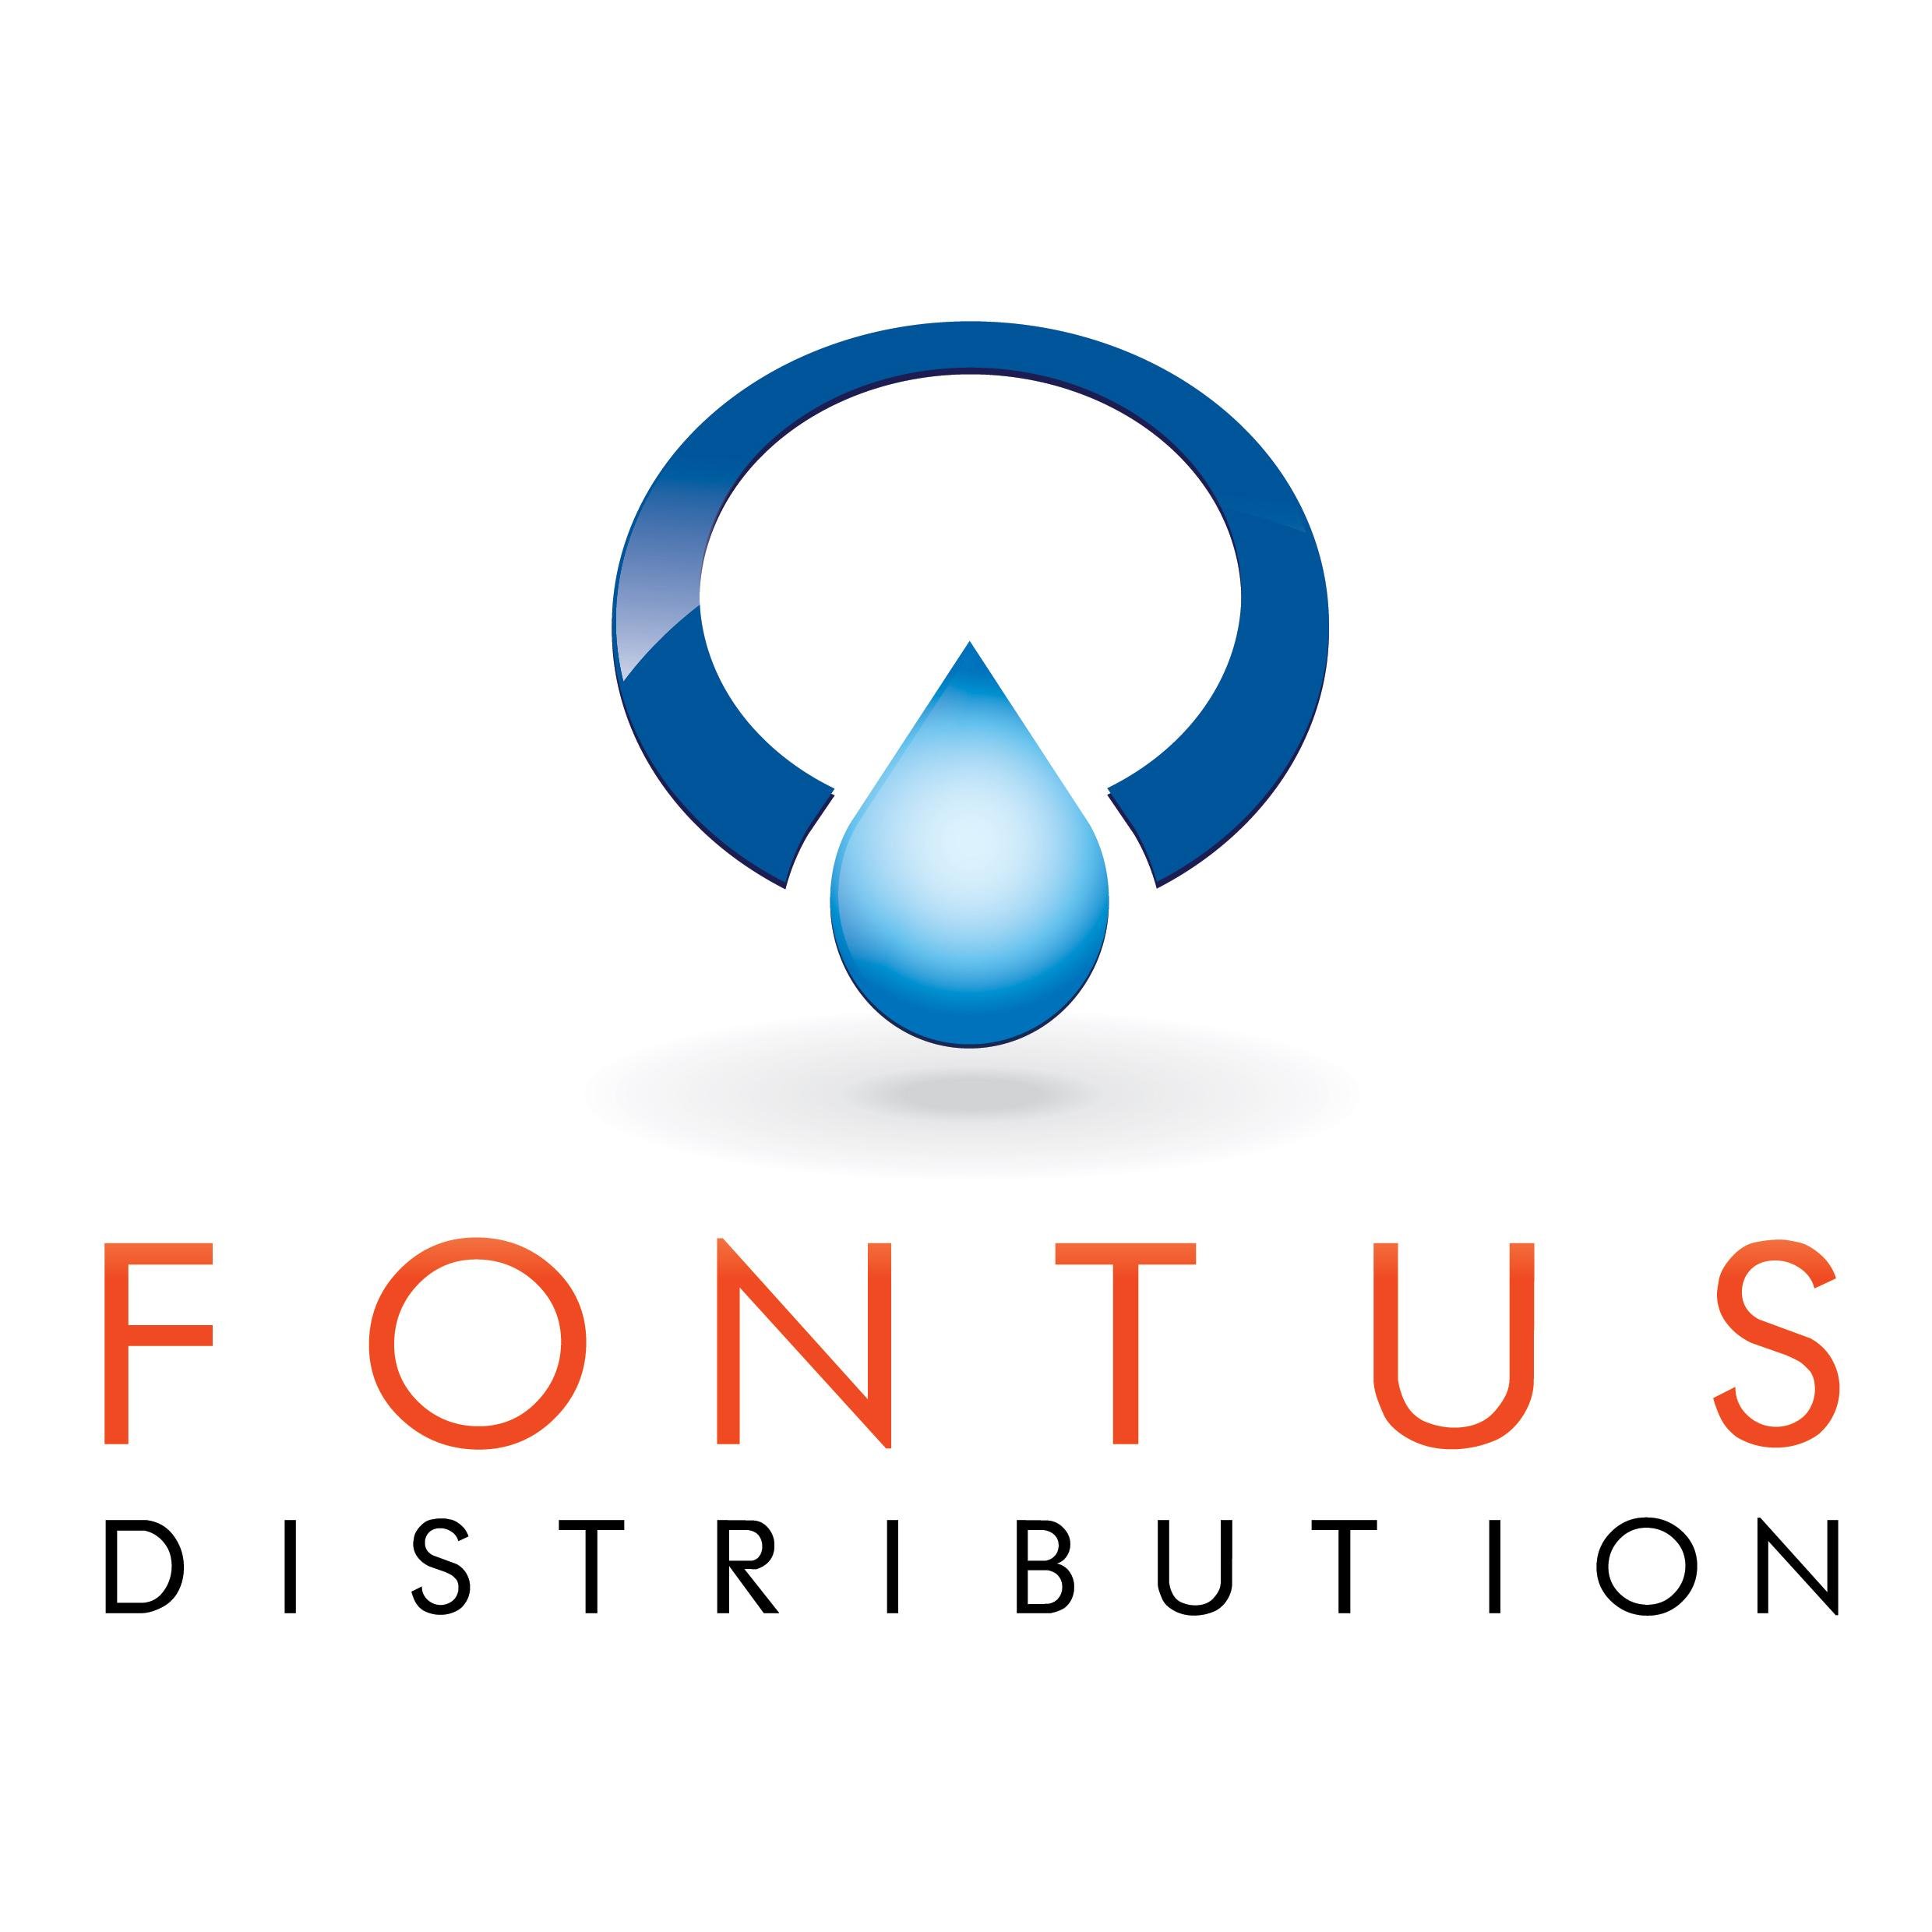 FONTUS DISTRIBUTION is Australia's leading distributor of affordable high quality international water filtration and purification systems...